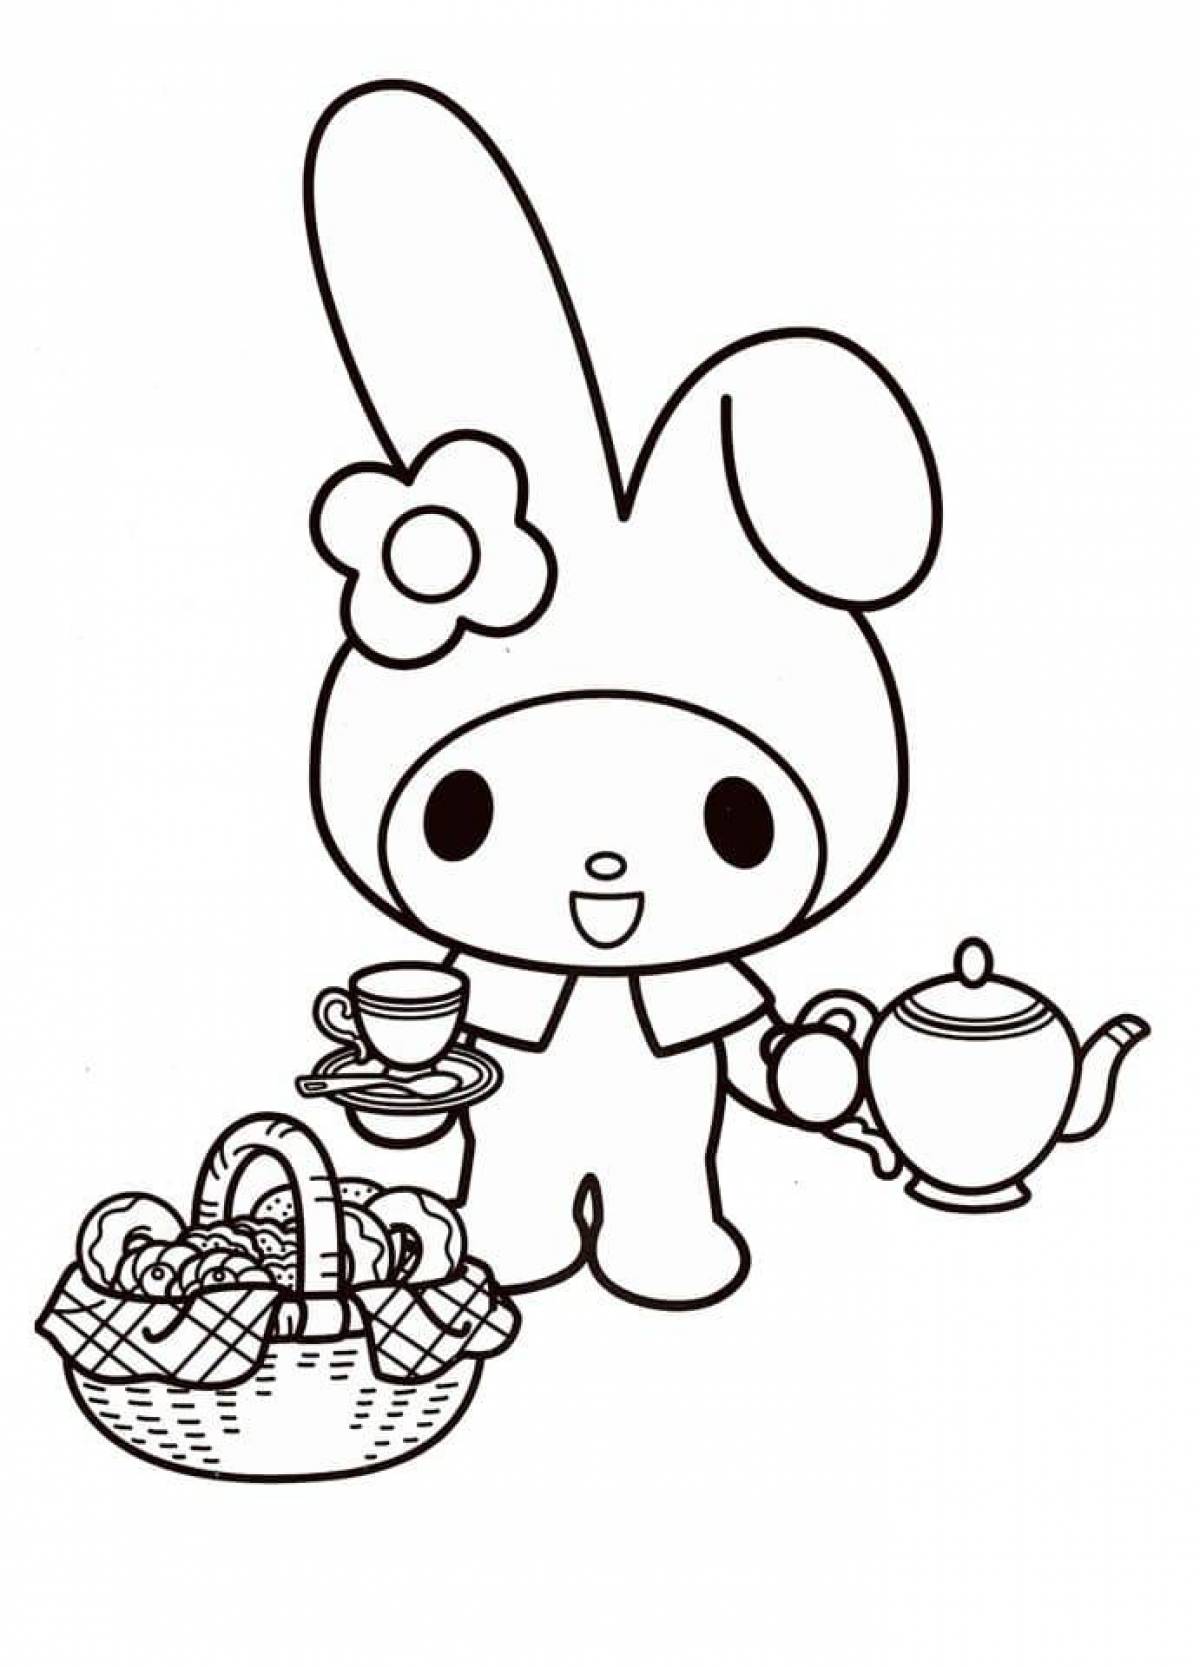 Charming kuromi and mai melody coloring book